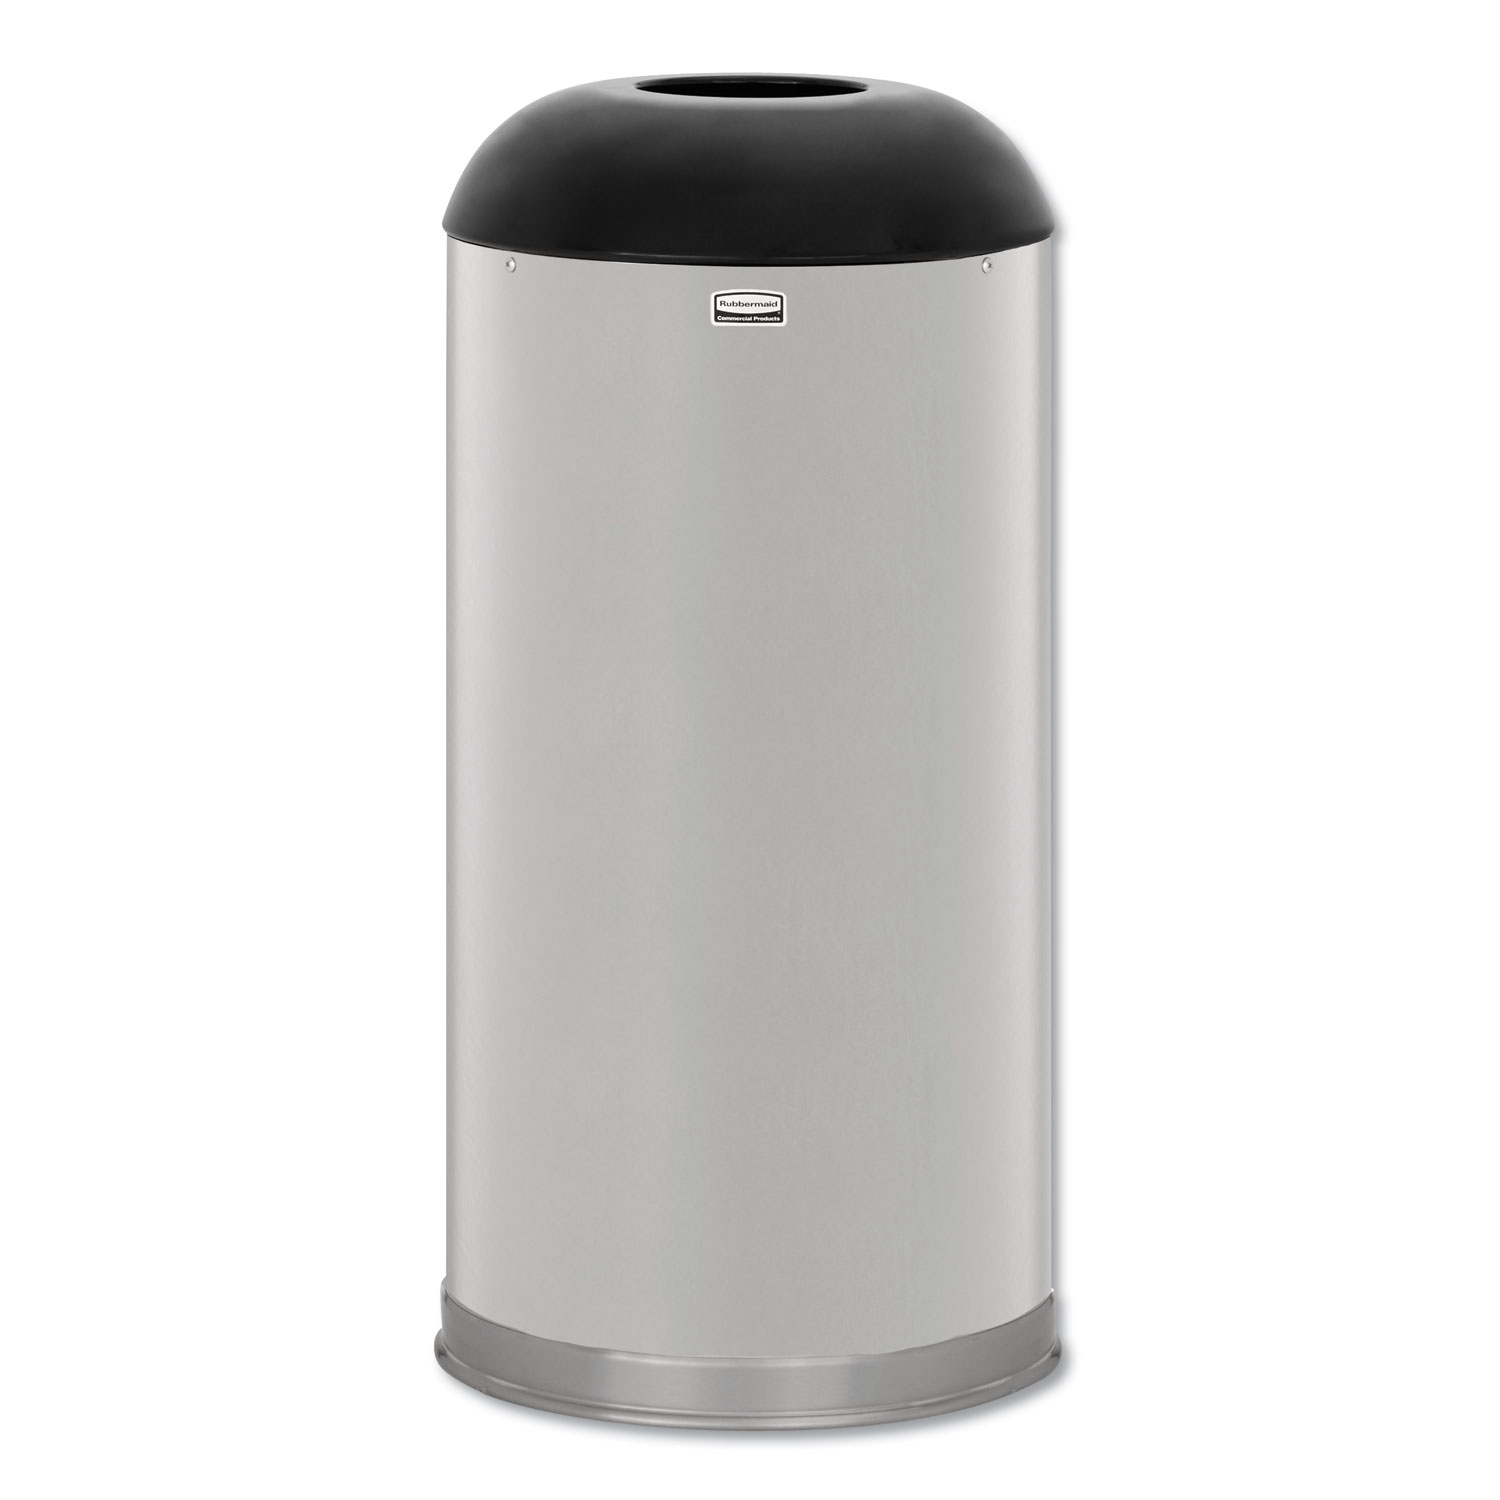  Rubbermaid Commercial FGR32SSSGL European and Metallic Drop-In Dome Top Receptacle, Round, 15 gal, Satin Stainless (RCPR32SSSGL) 